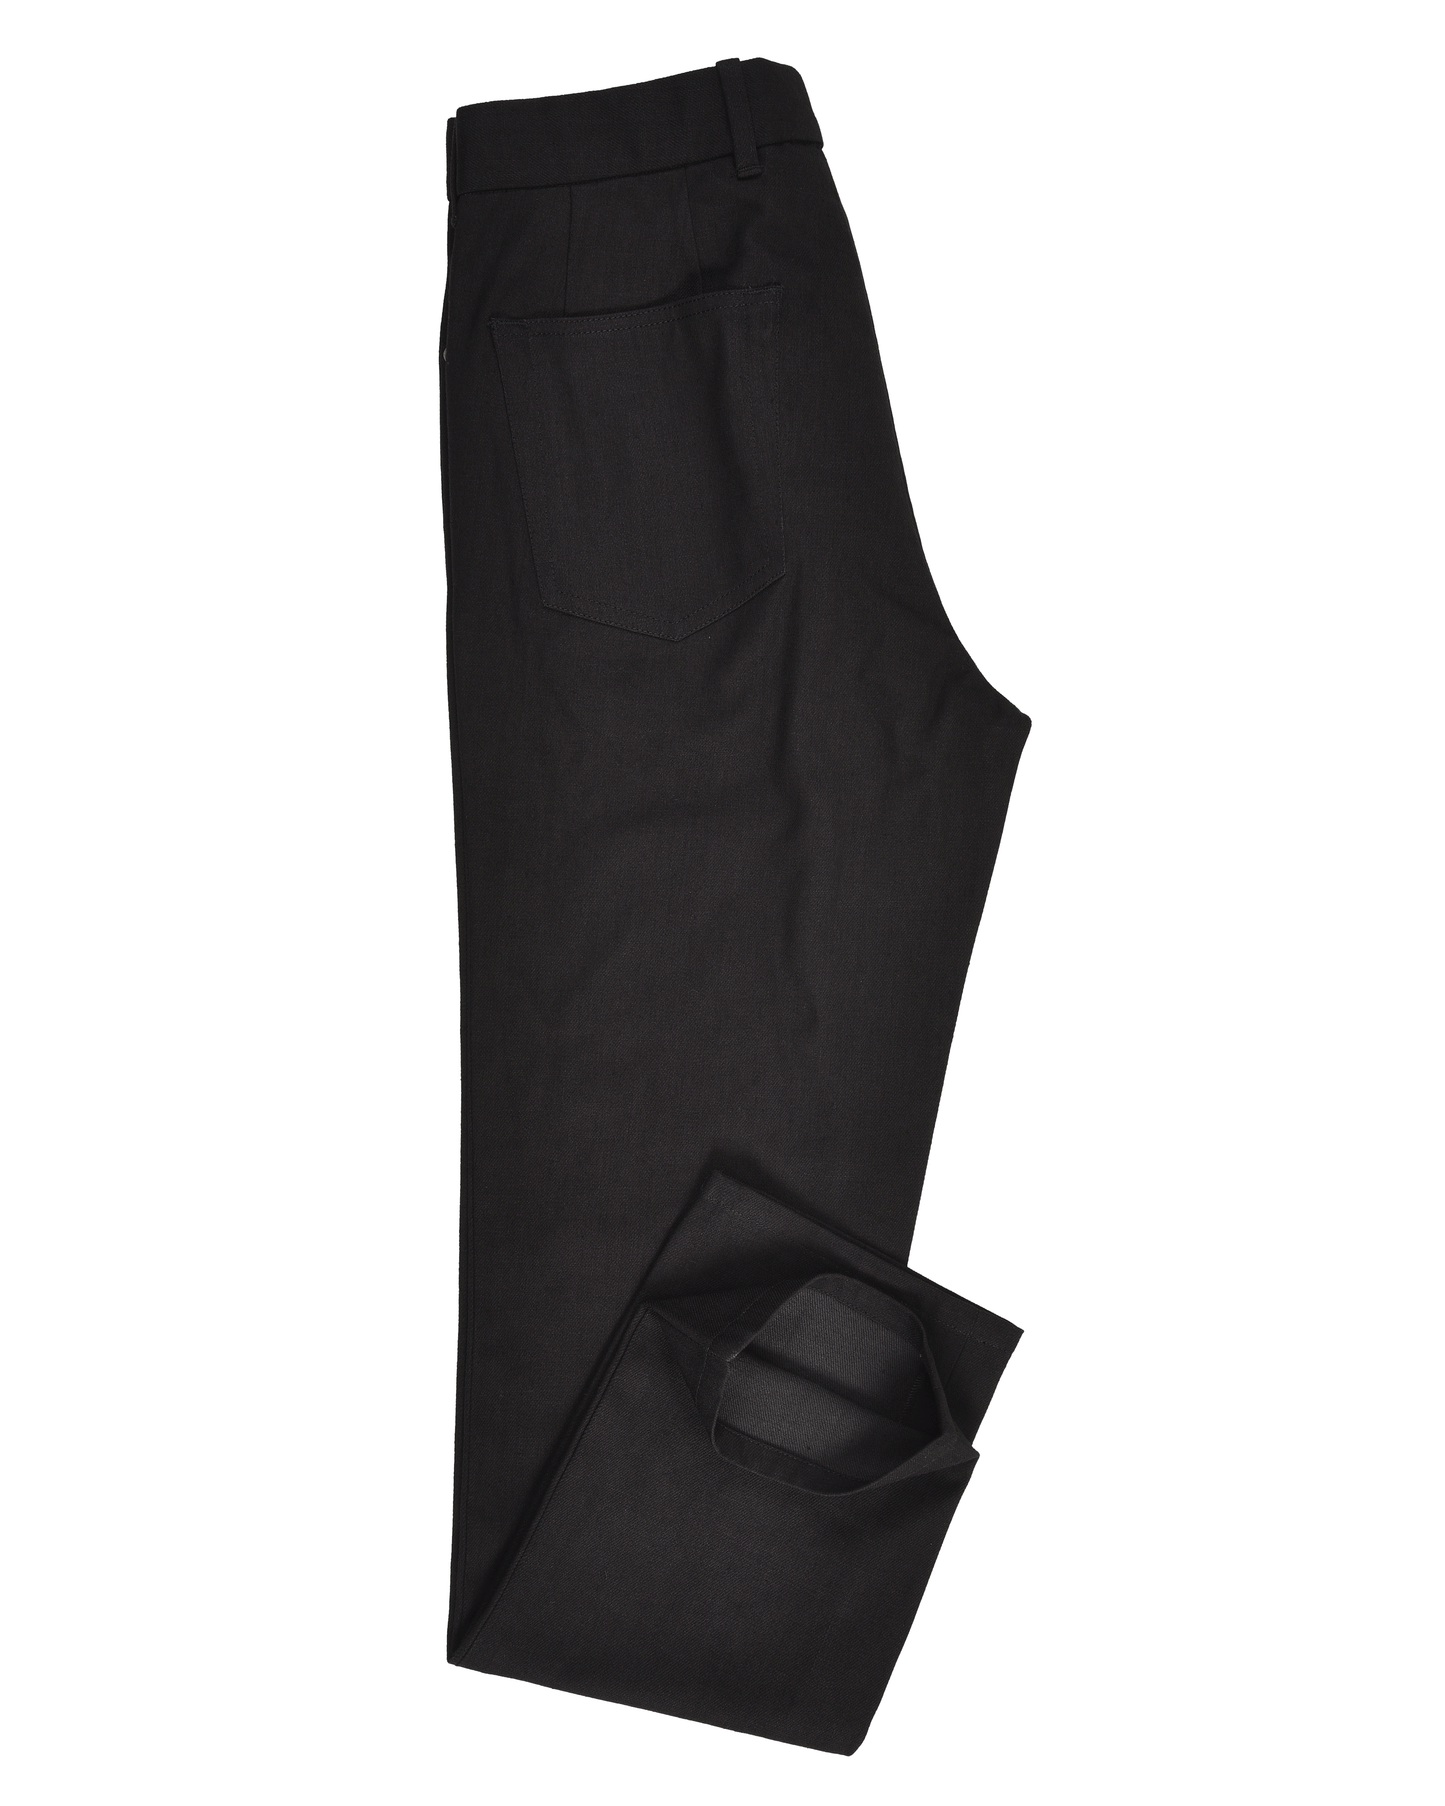 Side view of custom jeans for men by Luxire in jet black 2